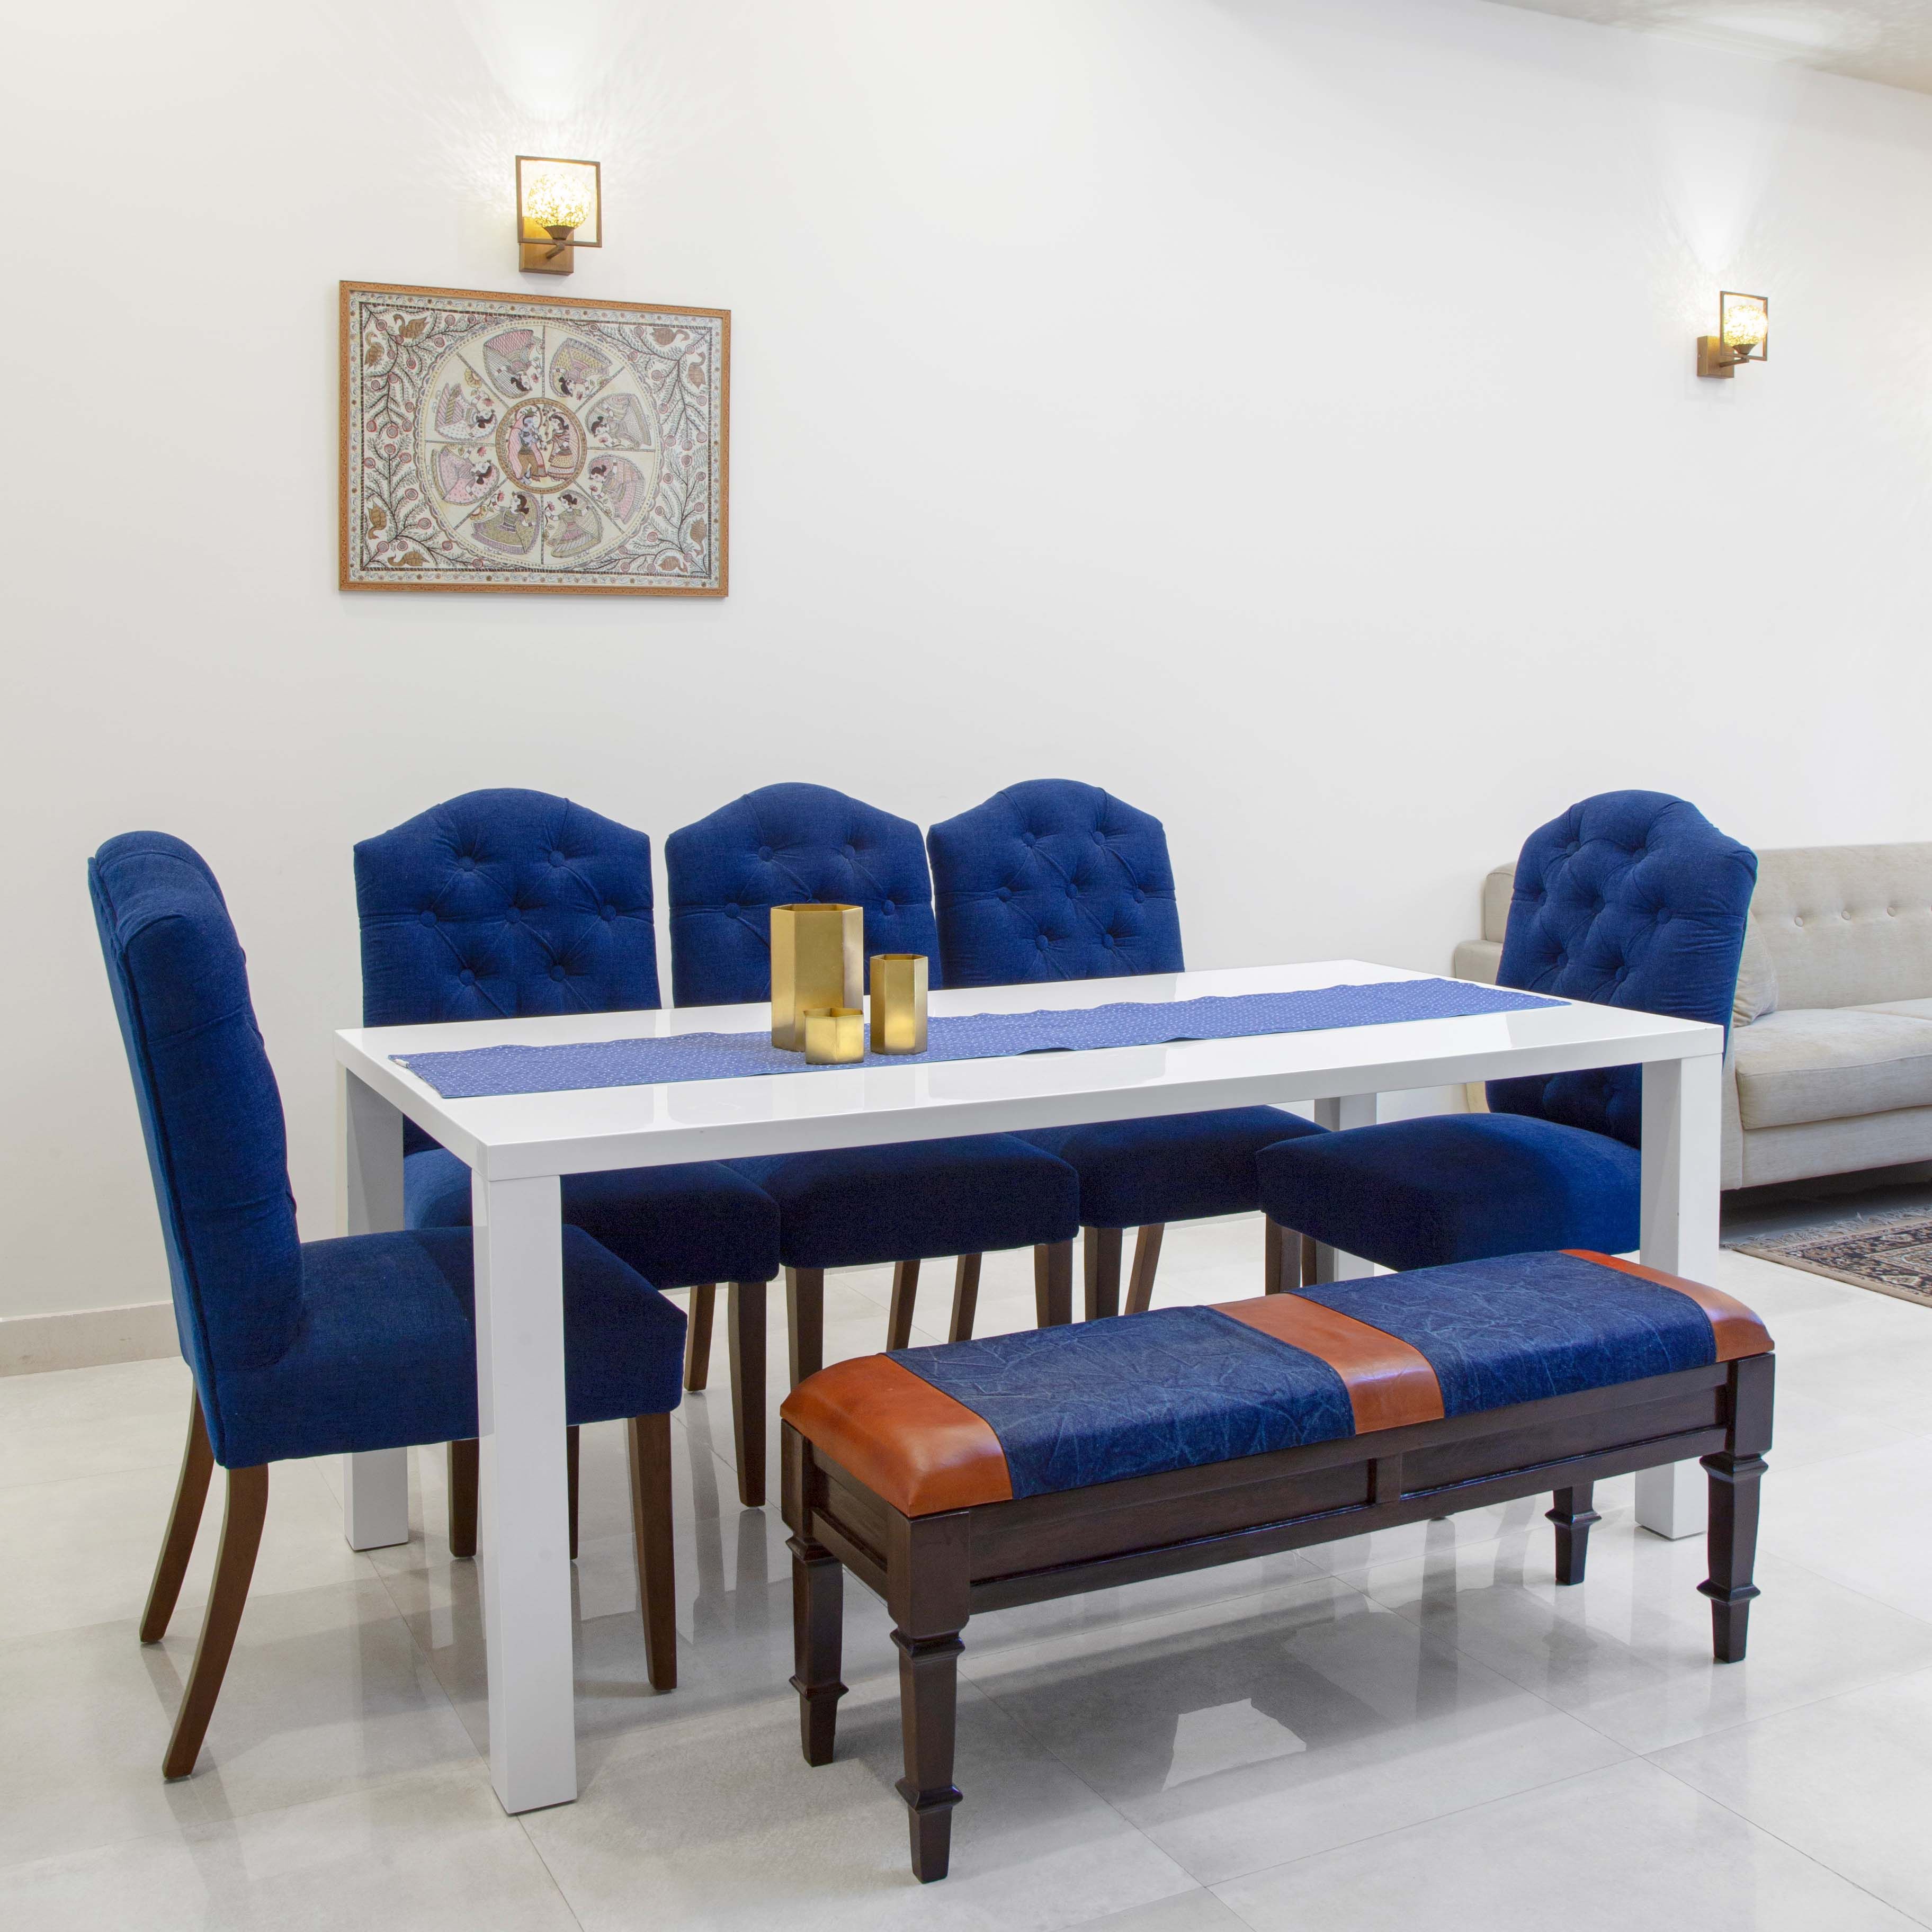 Modern Dining Room Design With Blue Upholstered Bench And Chairs